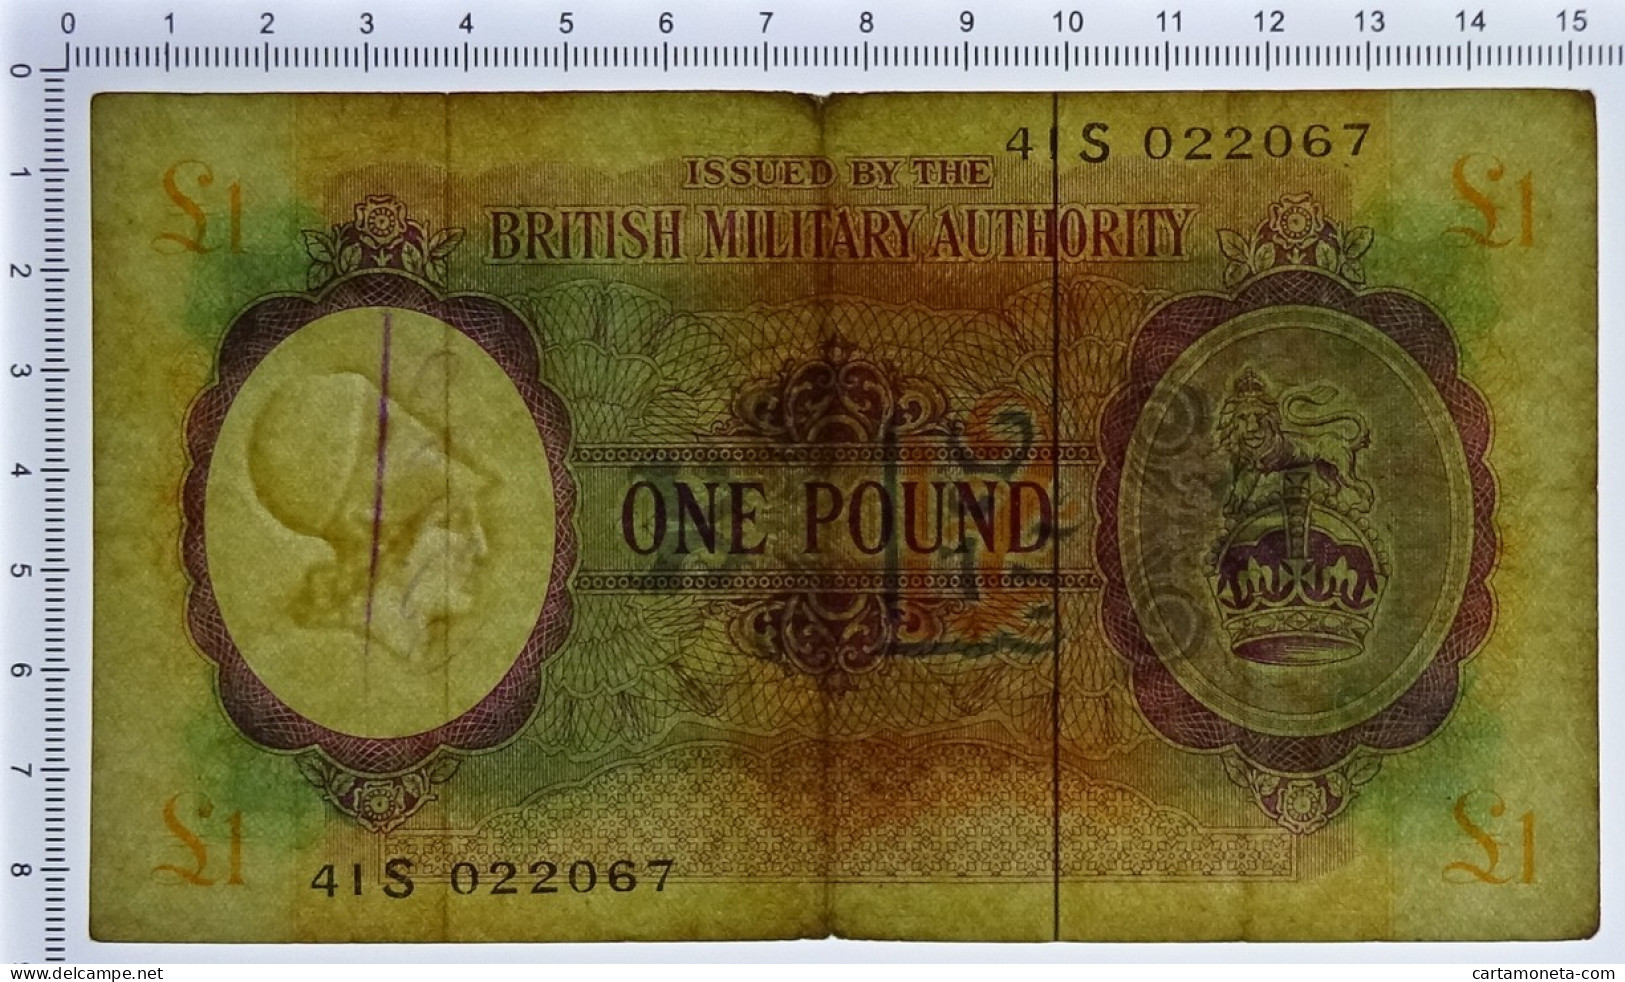 1 POUND OCCUPAZIONE INGLESE IN ITALIA BRITISH MIL. AUTHORITY 1943 BB- - Occupation Alliés Seconde Guerre Mondiale